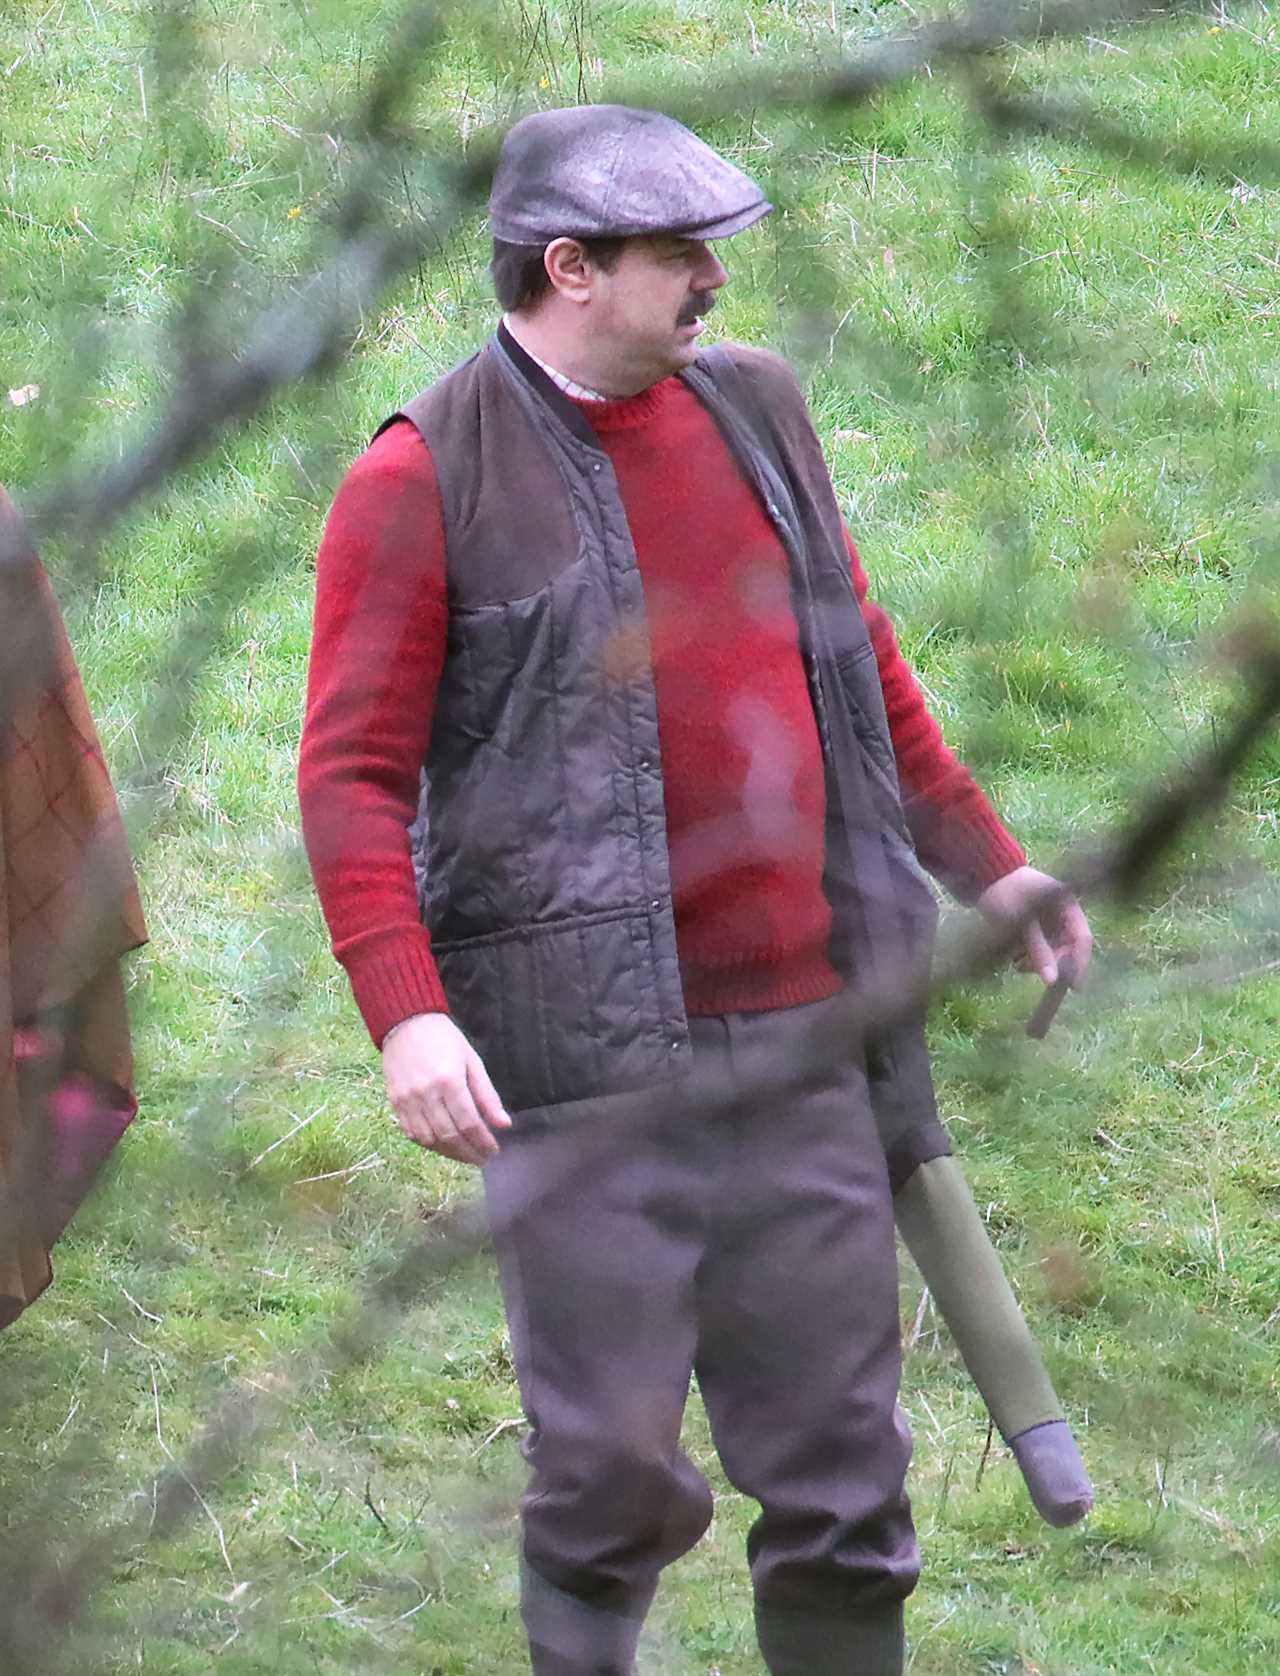 TV and film legend looks unrecognisable as he films scenes for new Disney+ show with glam Emily Atack